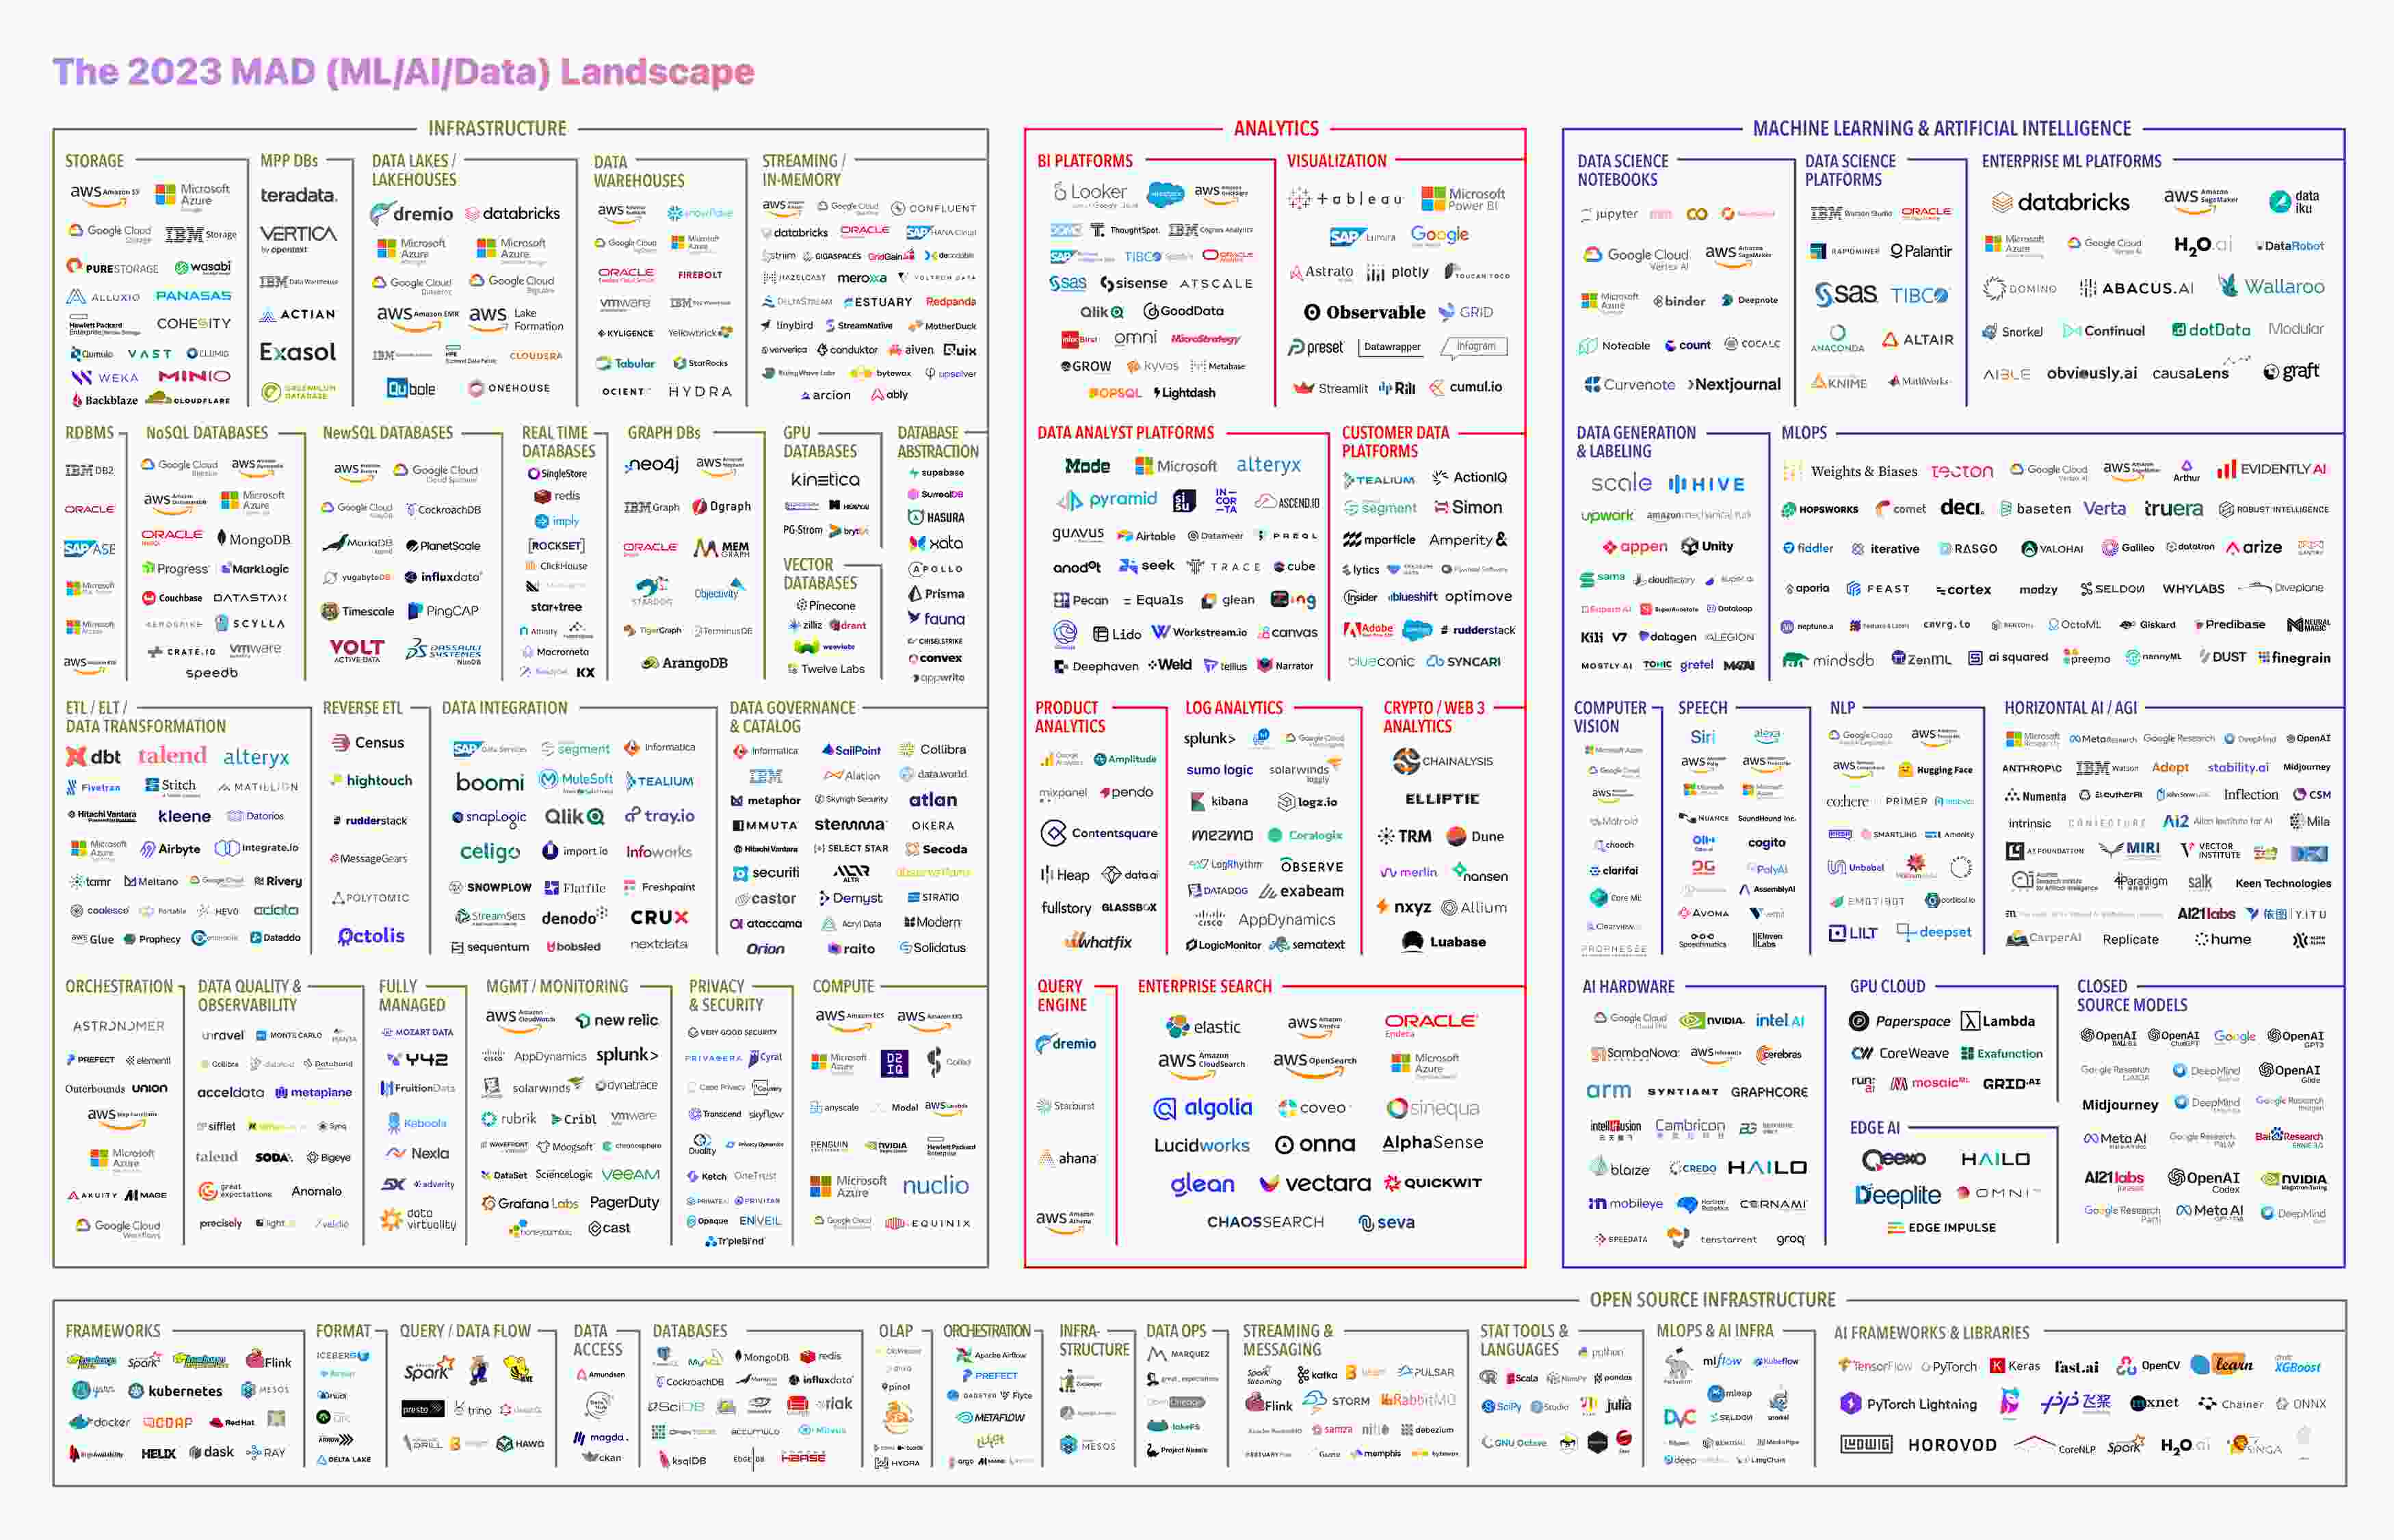 A landscape map in the form of a diagram showing the Machine Learning, Artificial Intelligence, and Data Landscape. Created by FirstMark, it is the definitive guide of the companies and products in this space. The source image can be found here: https://mad.firstmark.com/